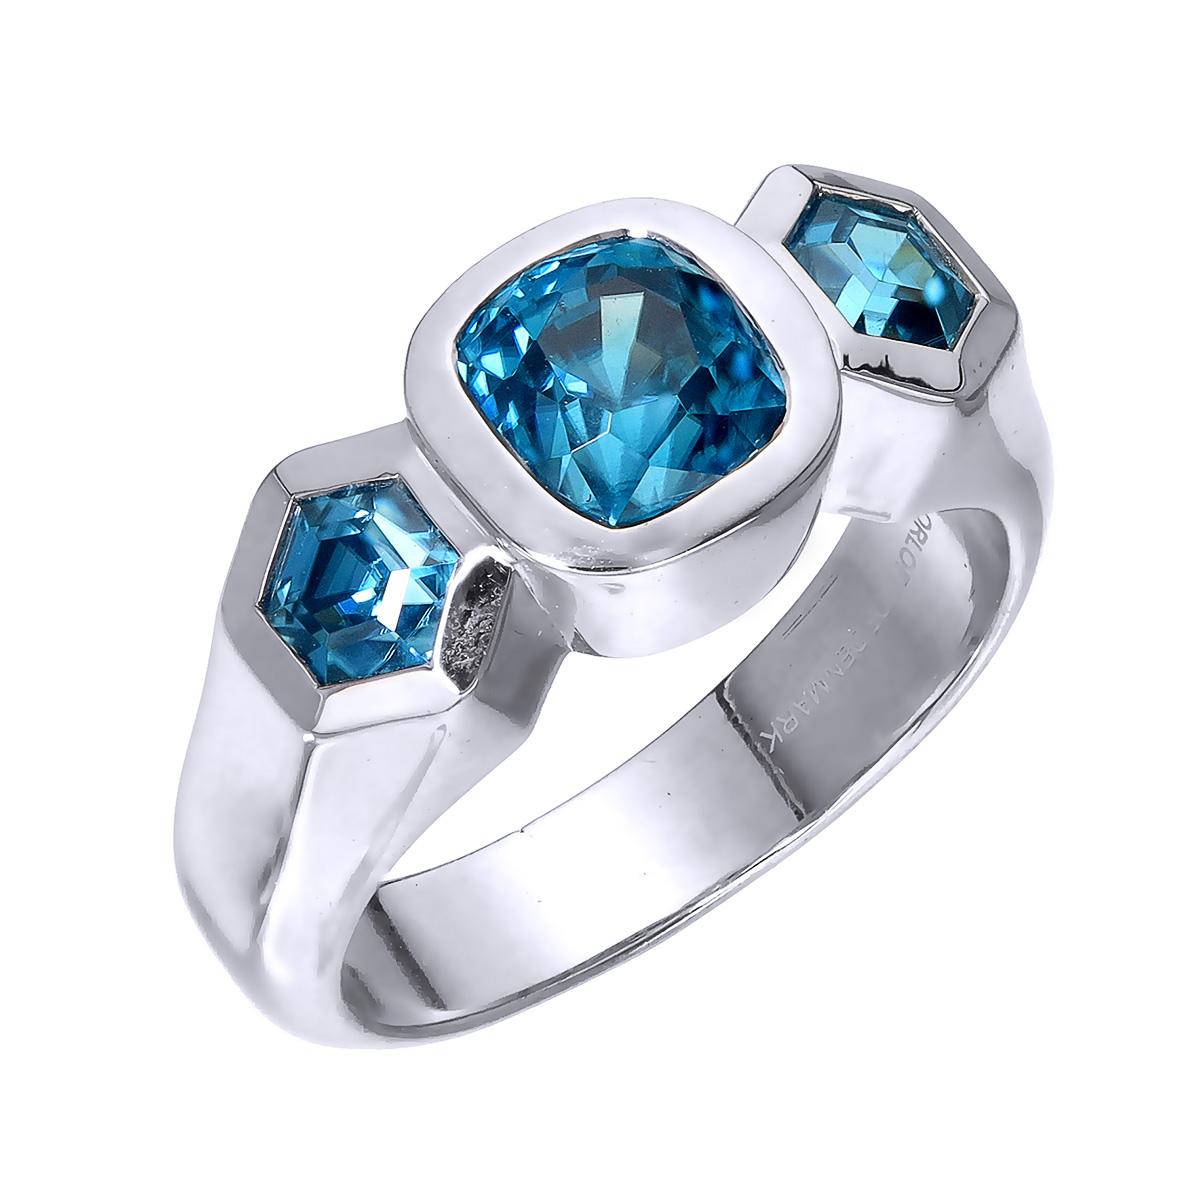 Orloff of Denmark; 925 Sterling Silver Ring set with three Natural Cambodian Blue Zircons totaling to 4.07 carats.

This piece has been meticulously hand-crafted out of 925 sterling silver.
In the center sits a 2.65 carat blue zircon mined, polished